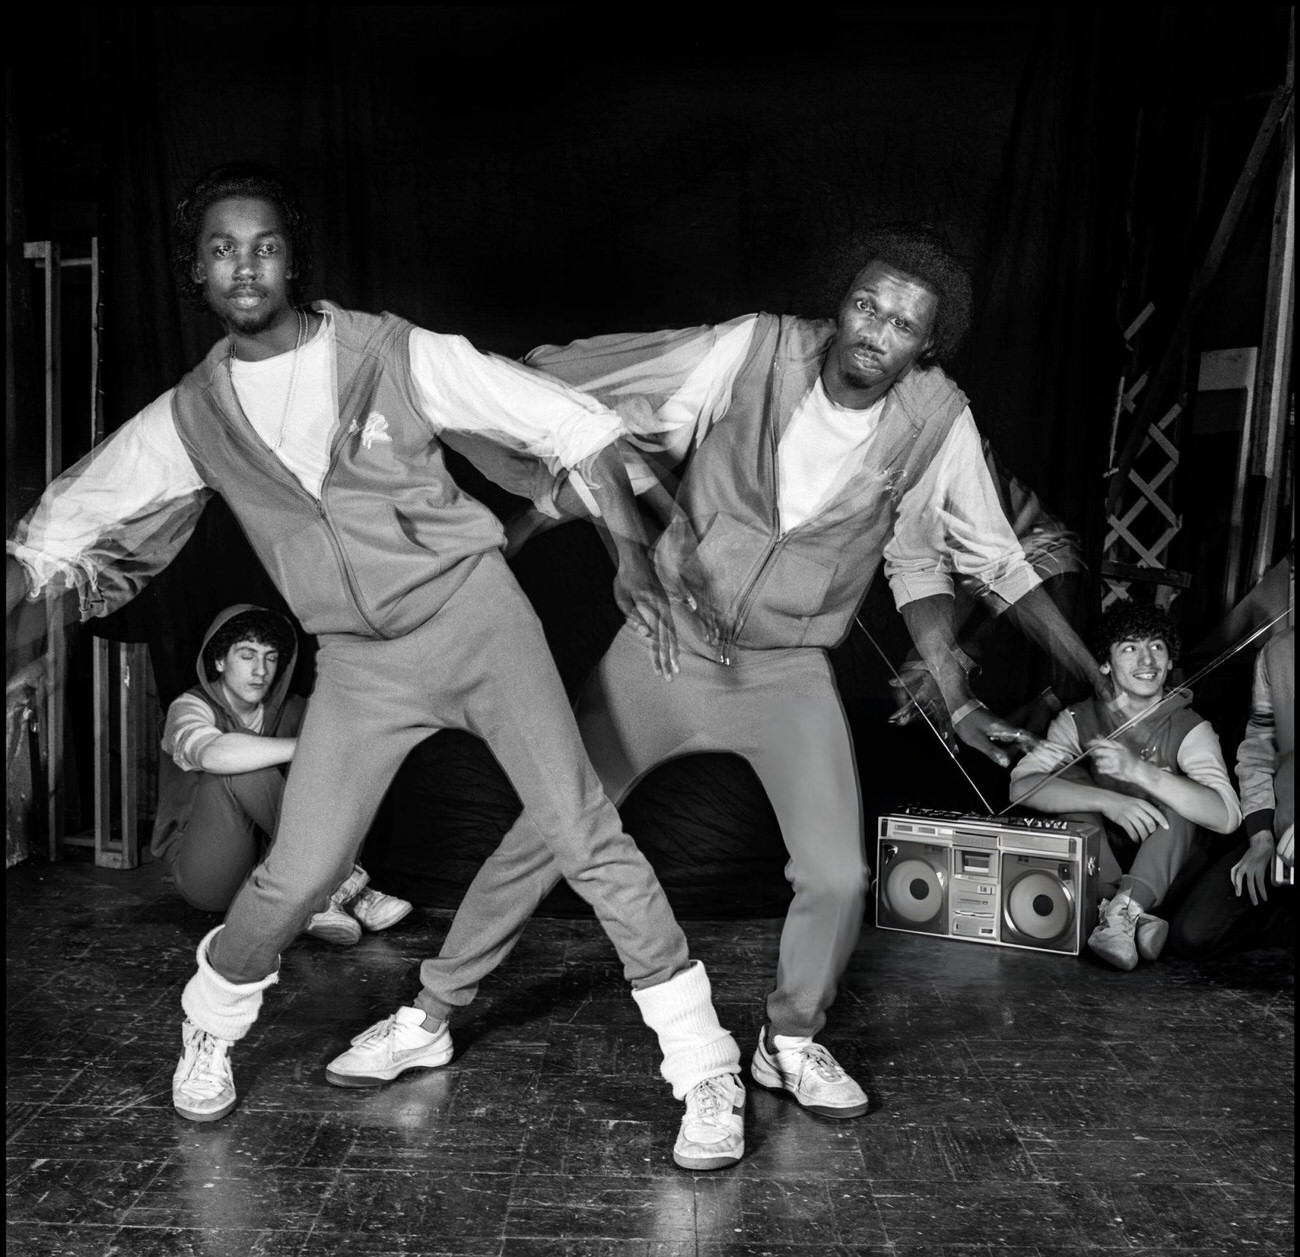 Members Of The Soul Sonic Rockers, A Breakdance Team From New York City, 1983.